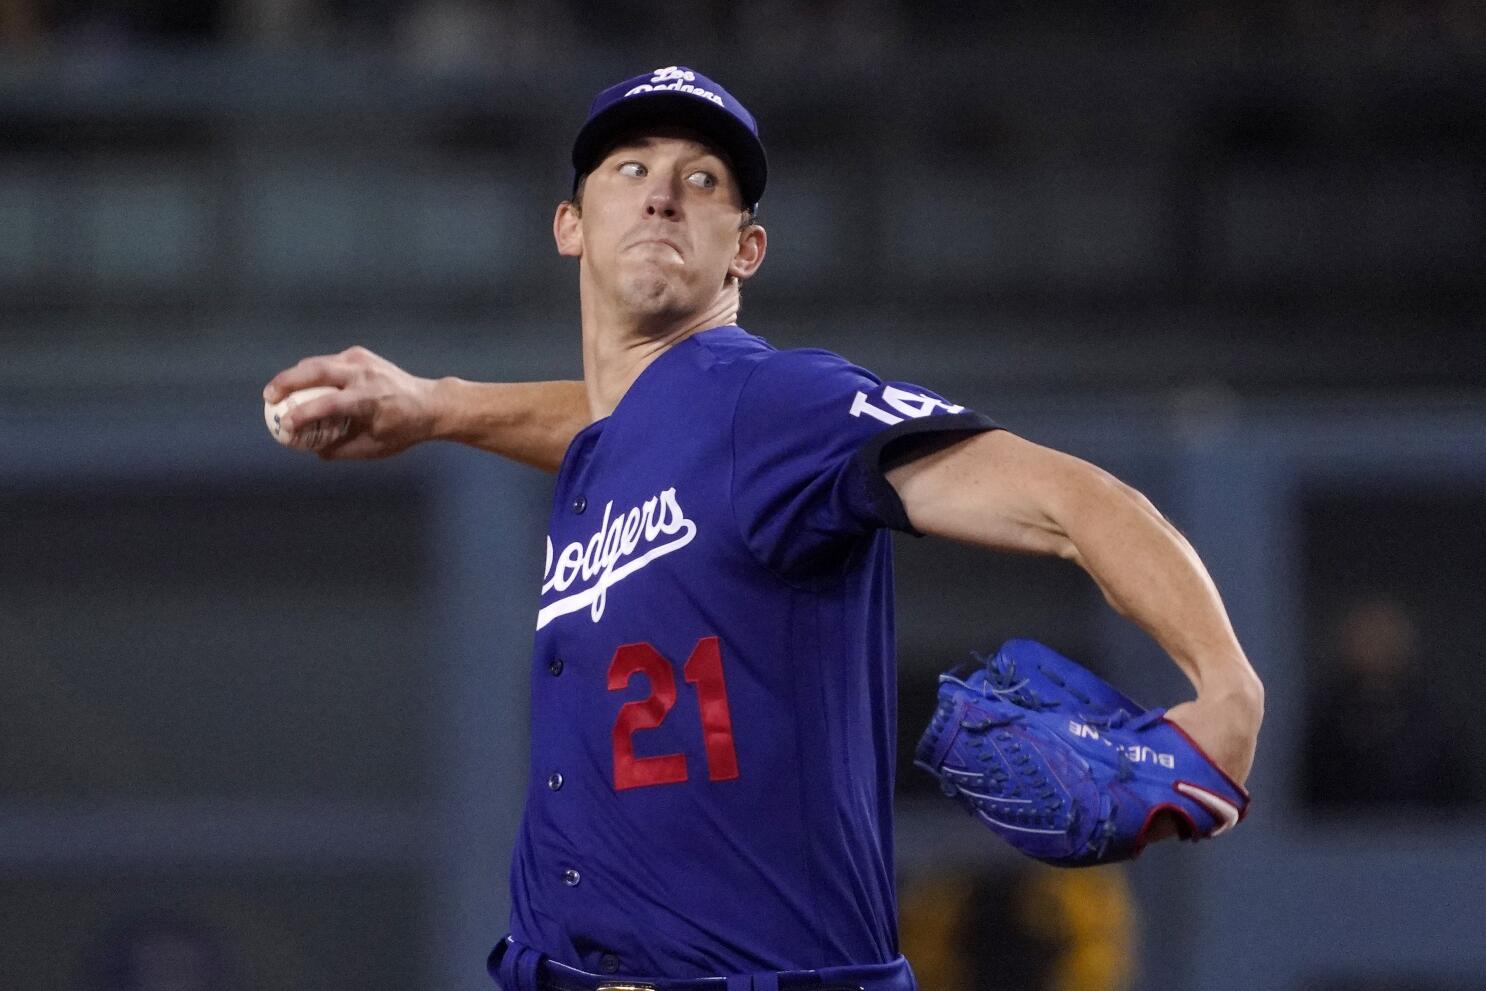 Los Angeles Dodgers: Walking into Wednesday with Walker Buehler